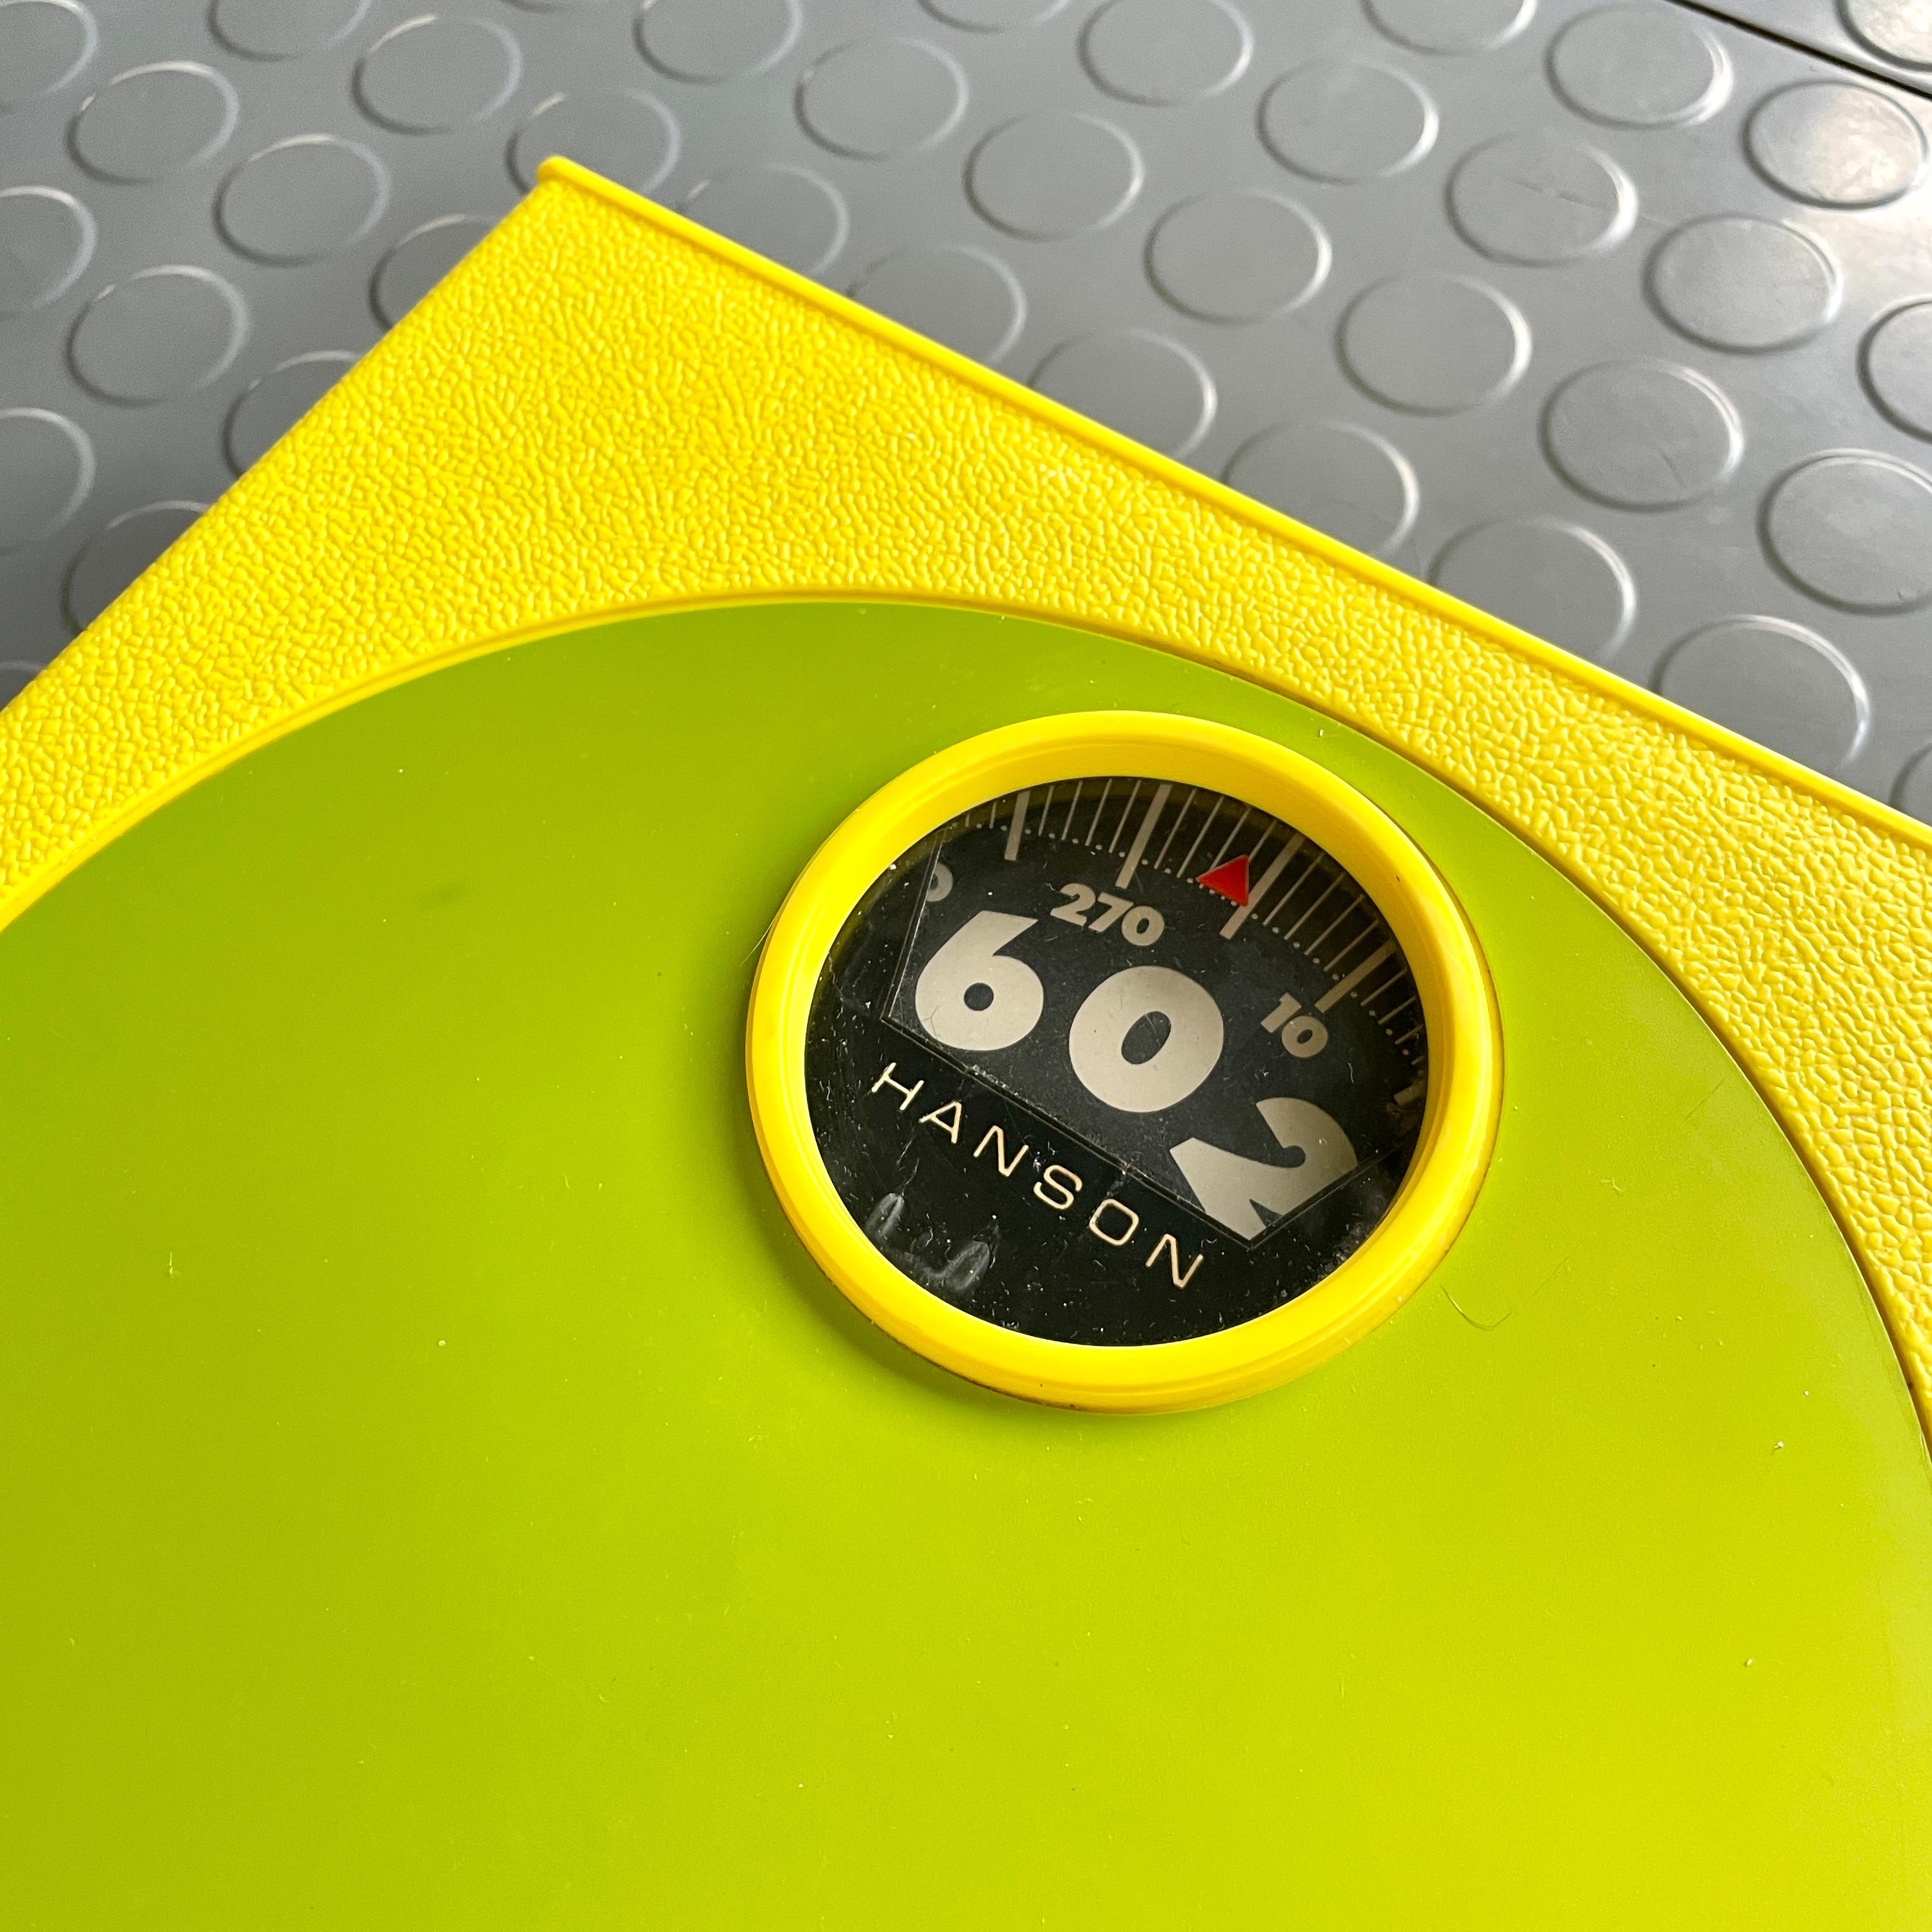 1960s Bathroom Scale by Hanson in Lemon Yellow Lime Green Dot Mid-Century Mod In Good Condition For Sale In Hyattsville, MD